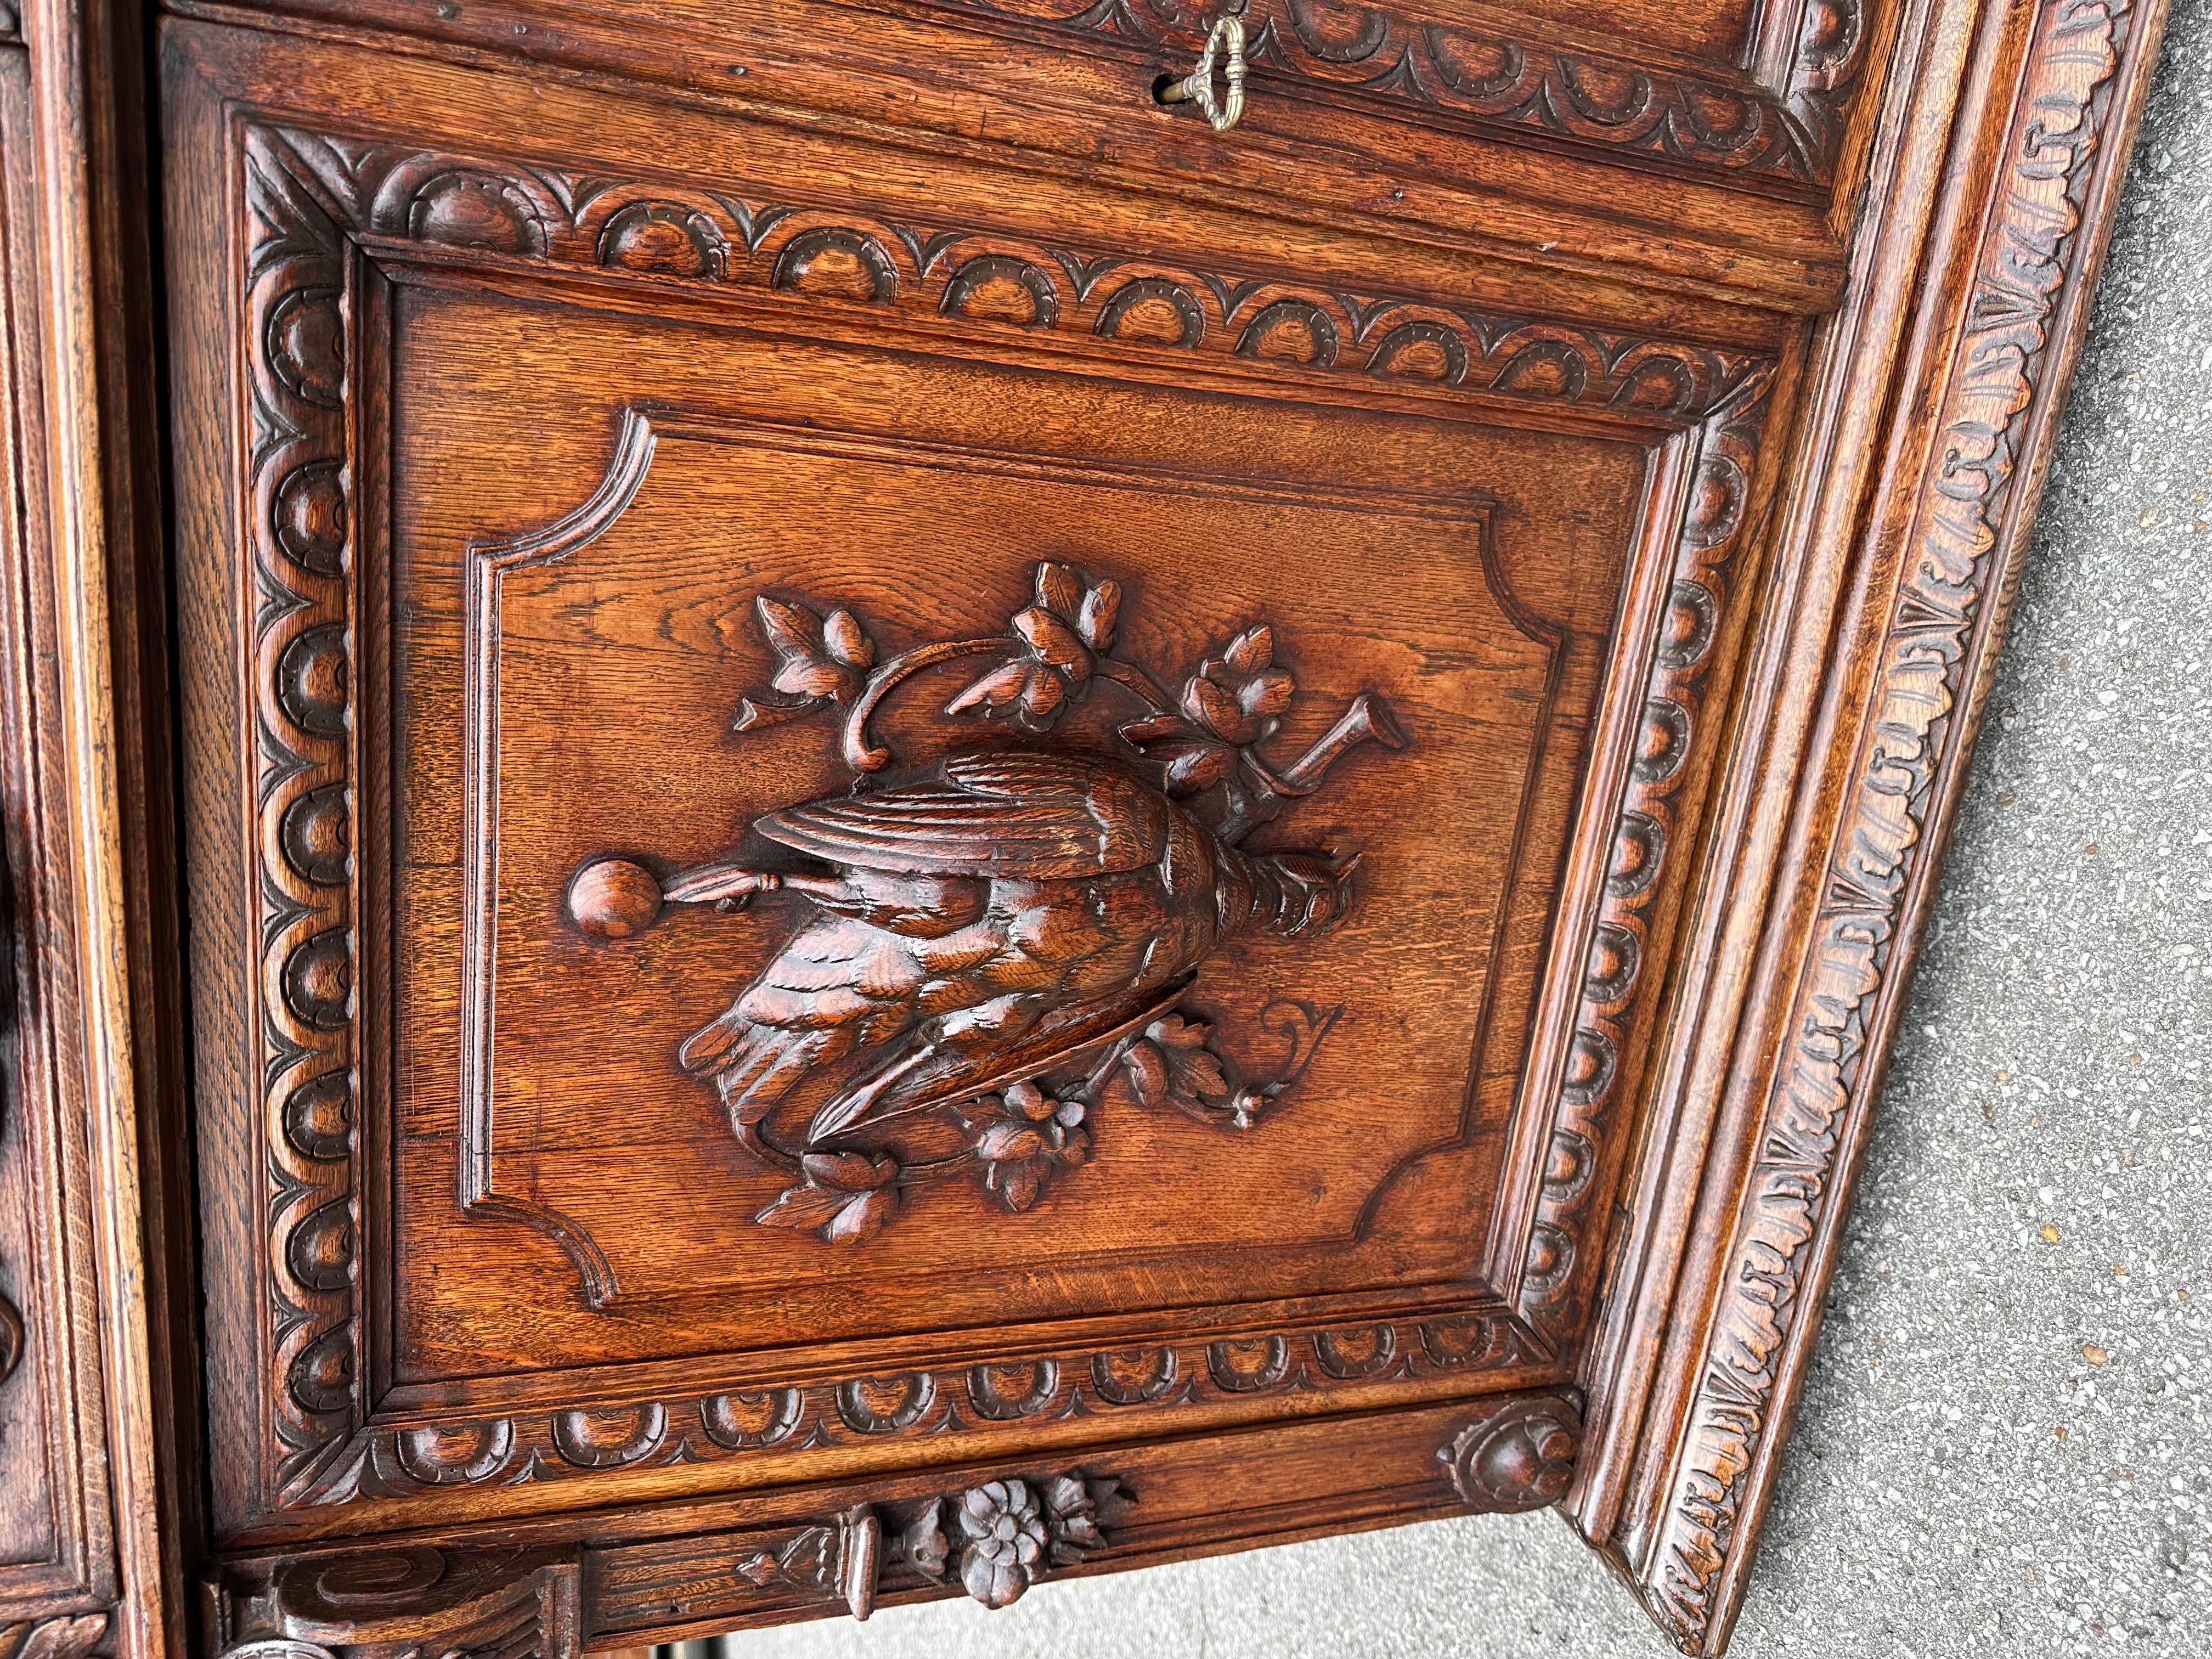 This is an absolutely stunning server the carving is so delicate and precise depicting a pair of pheasants from the days hunt. The patina is so beautiful on this server With a beautiful French polish.